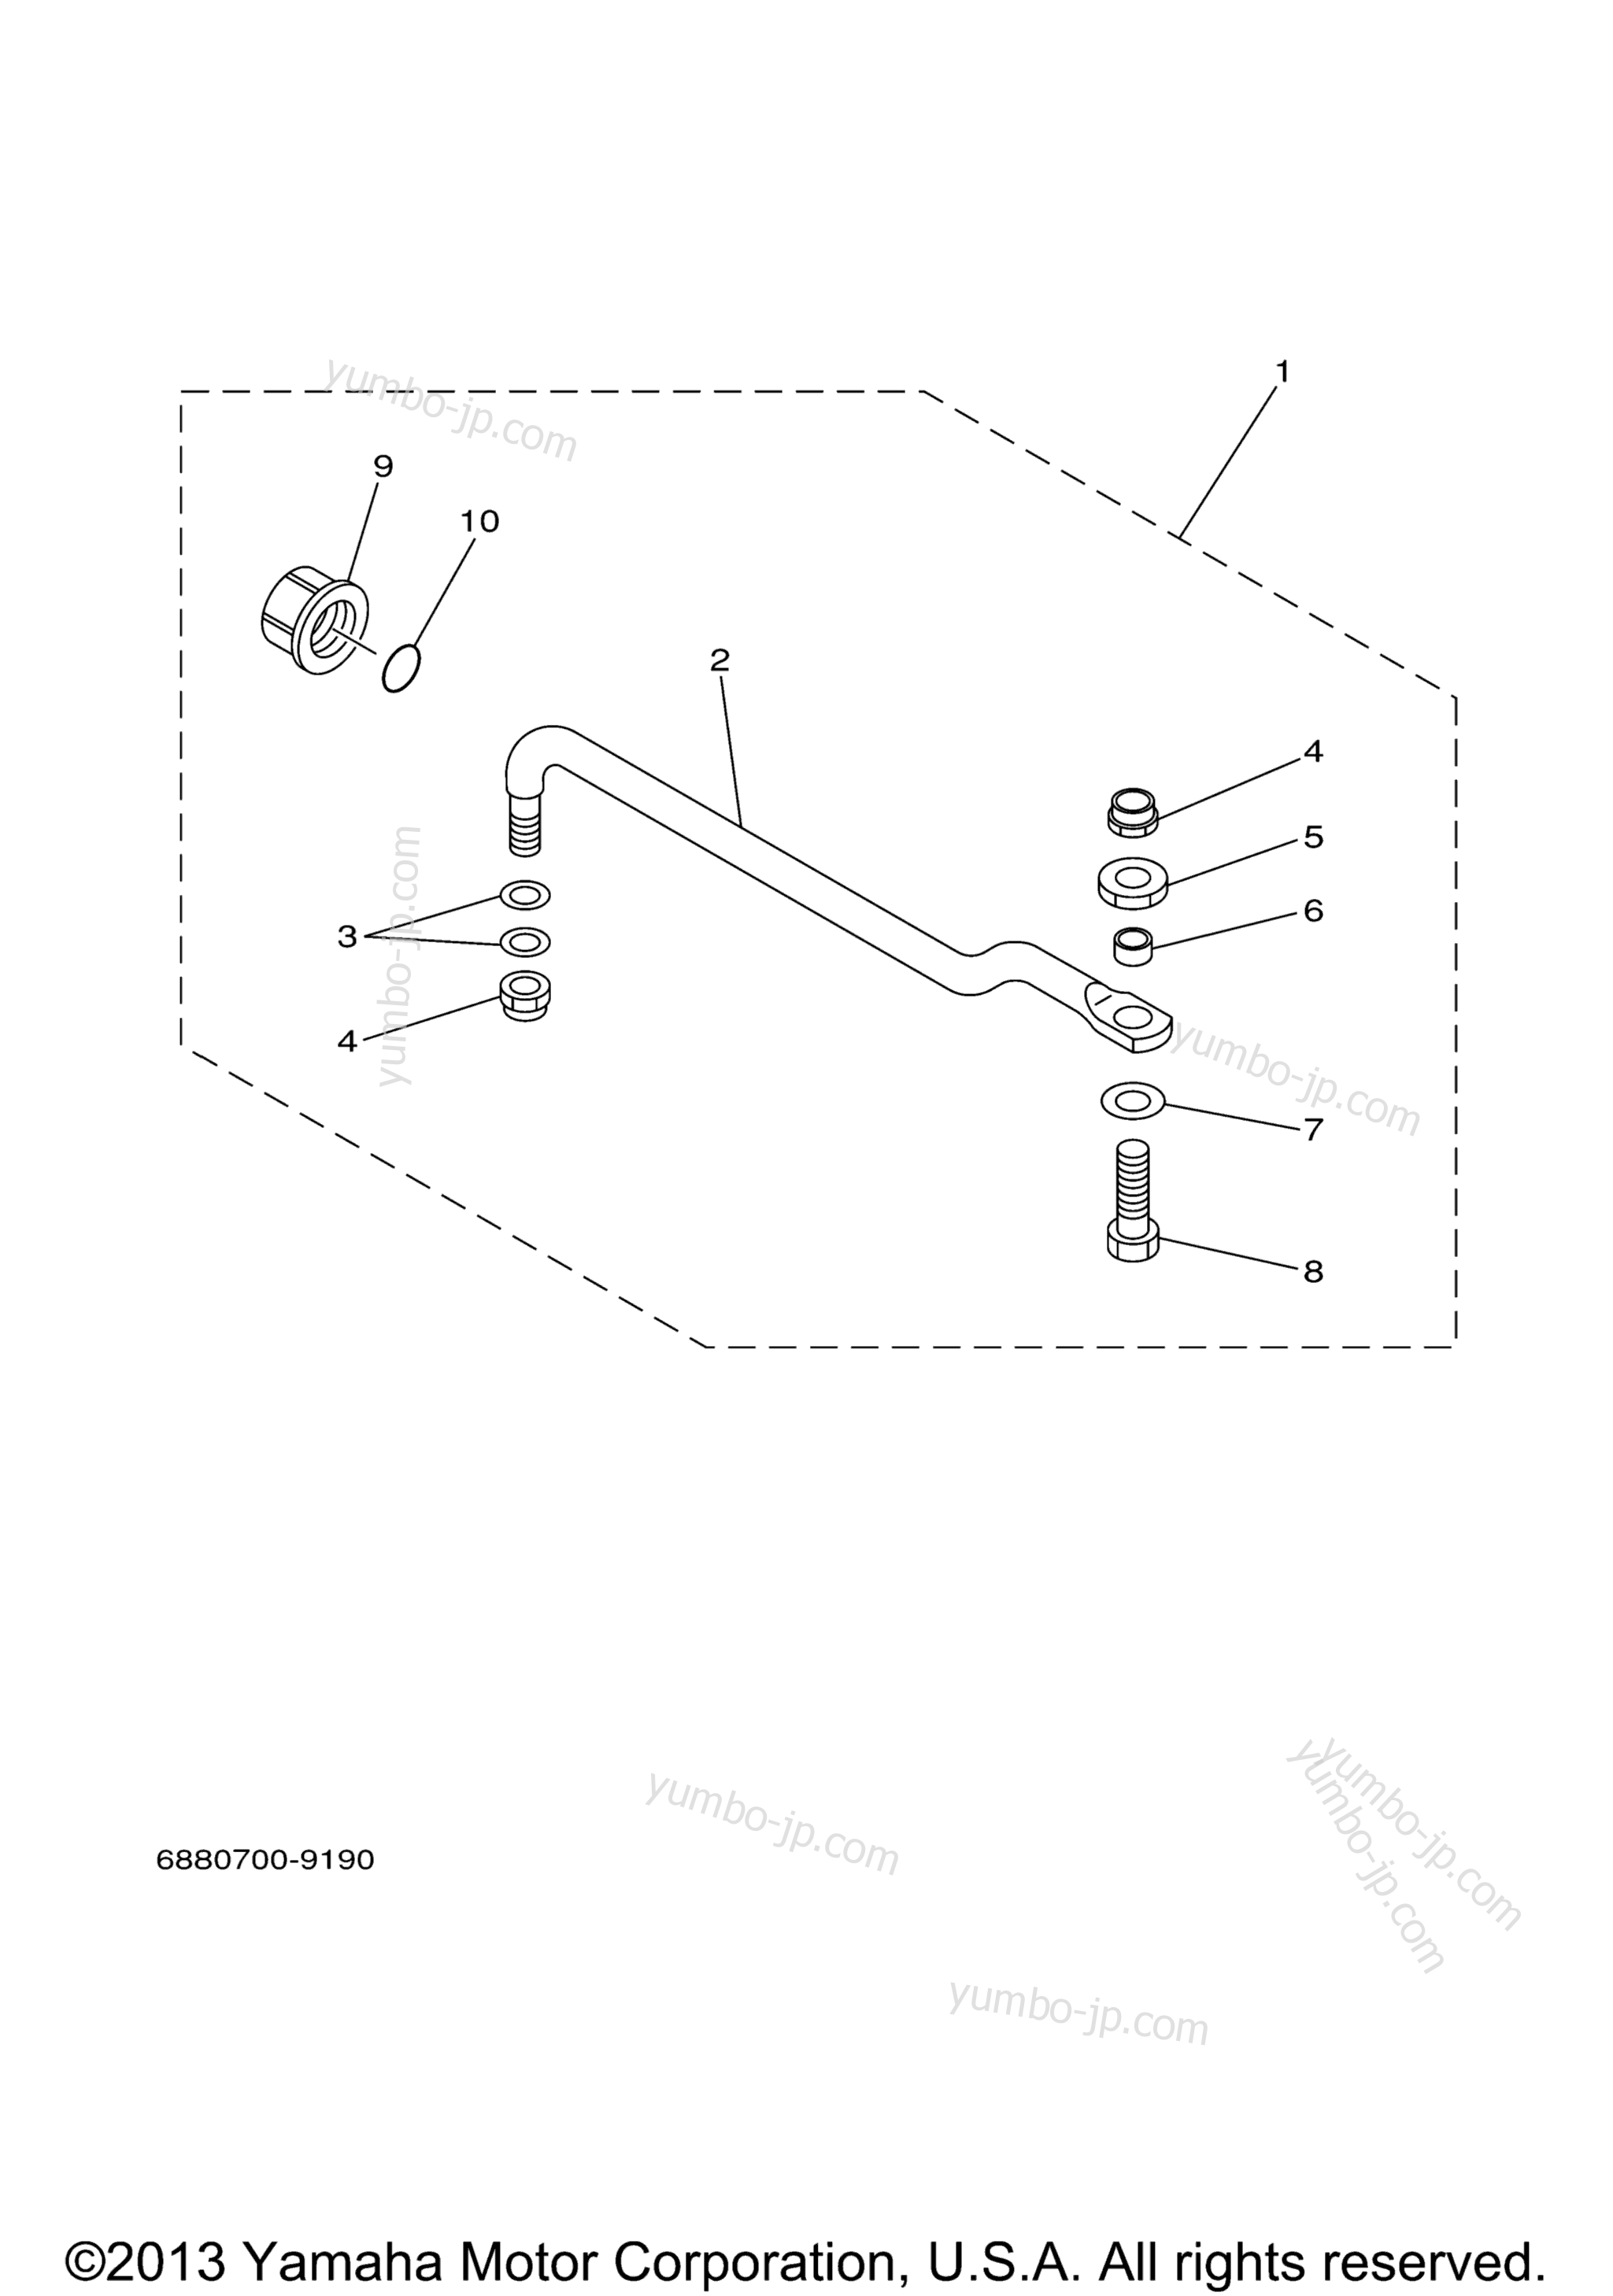 Steering Guide for outboards YAMAHA 70TLRY 2000 year